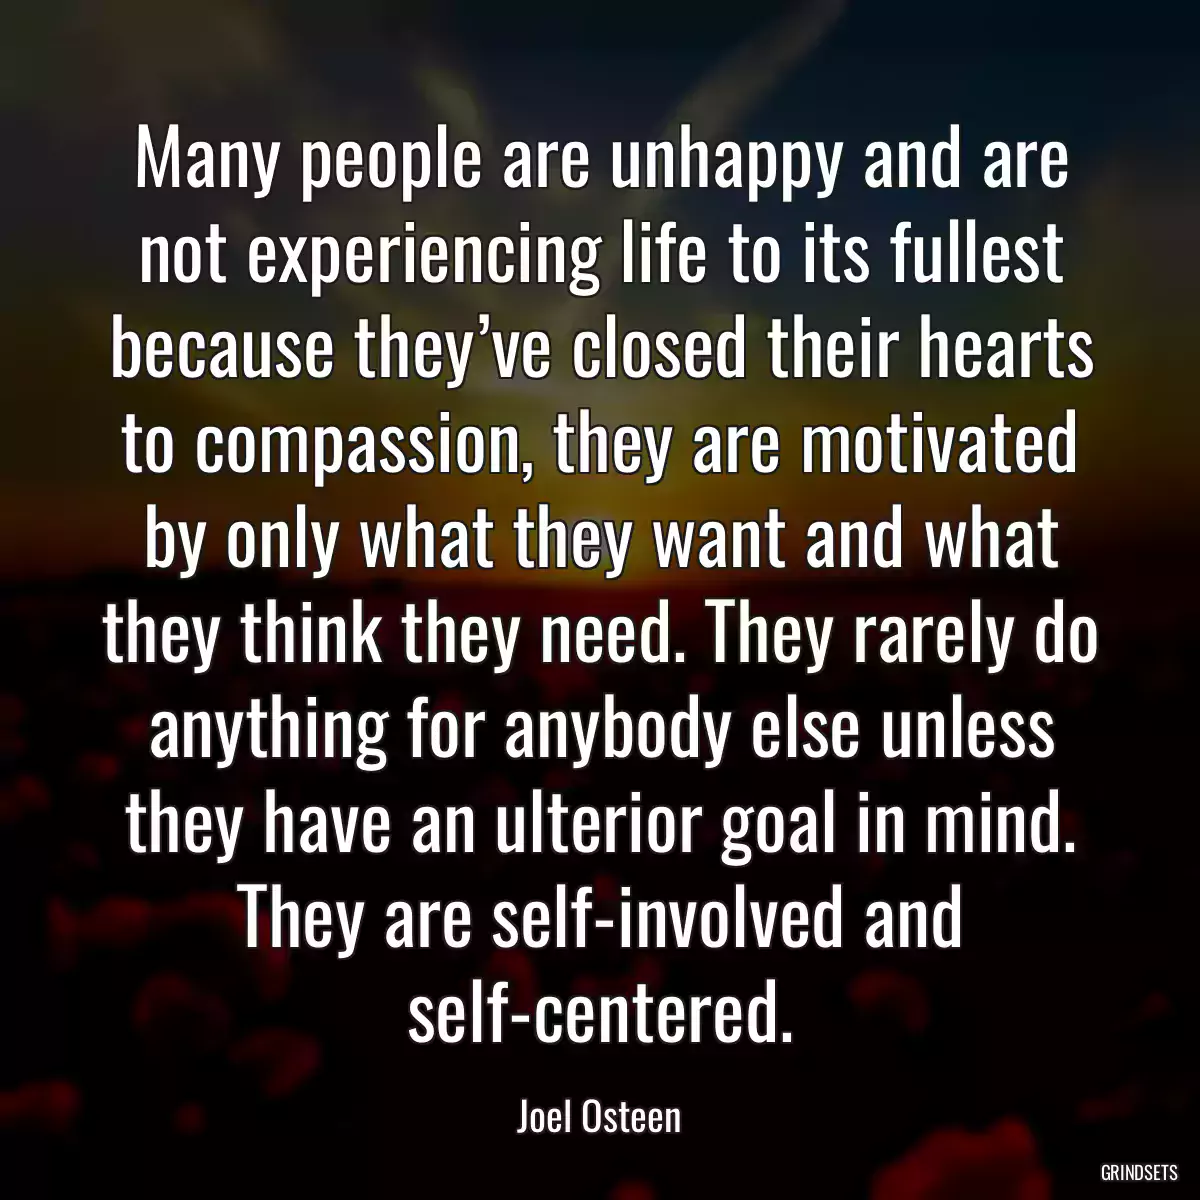 Many people are unhappy and are not experiencing life to its fullest because they’ve closed their hearts to compassion, they are motivated by only what they want and what they think they need. They rarely do anything for anybody else unless they have an ulterior goal in mind. They are self-involved and self-centered.